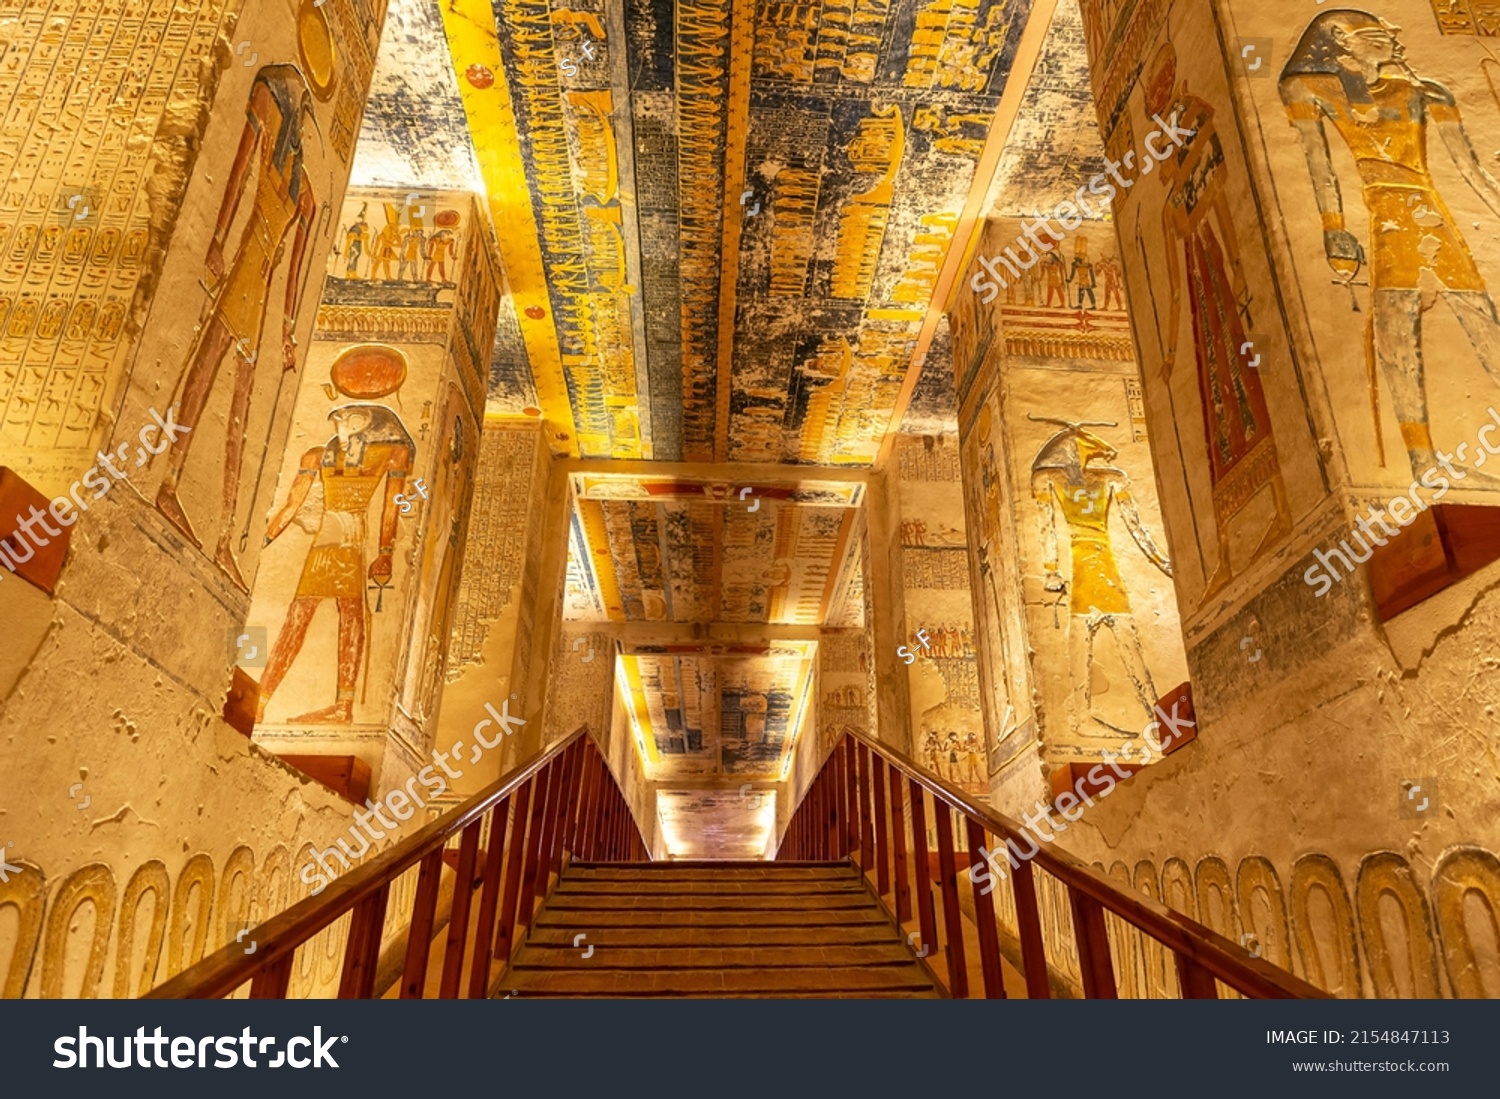 Tomb of pharaohs Rameses V and VI in Valley of the Kings, Luxor, Egypt #2154847113